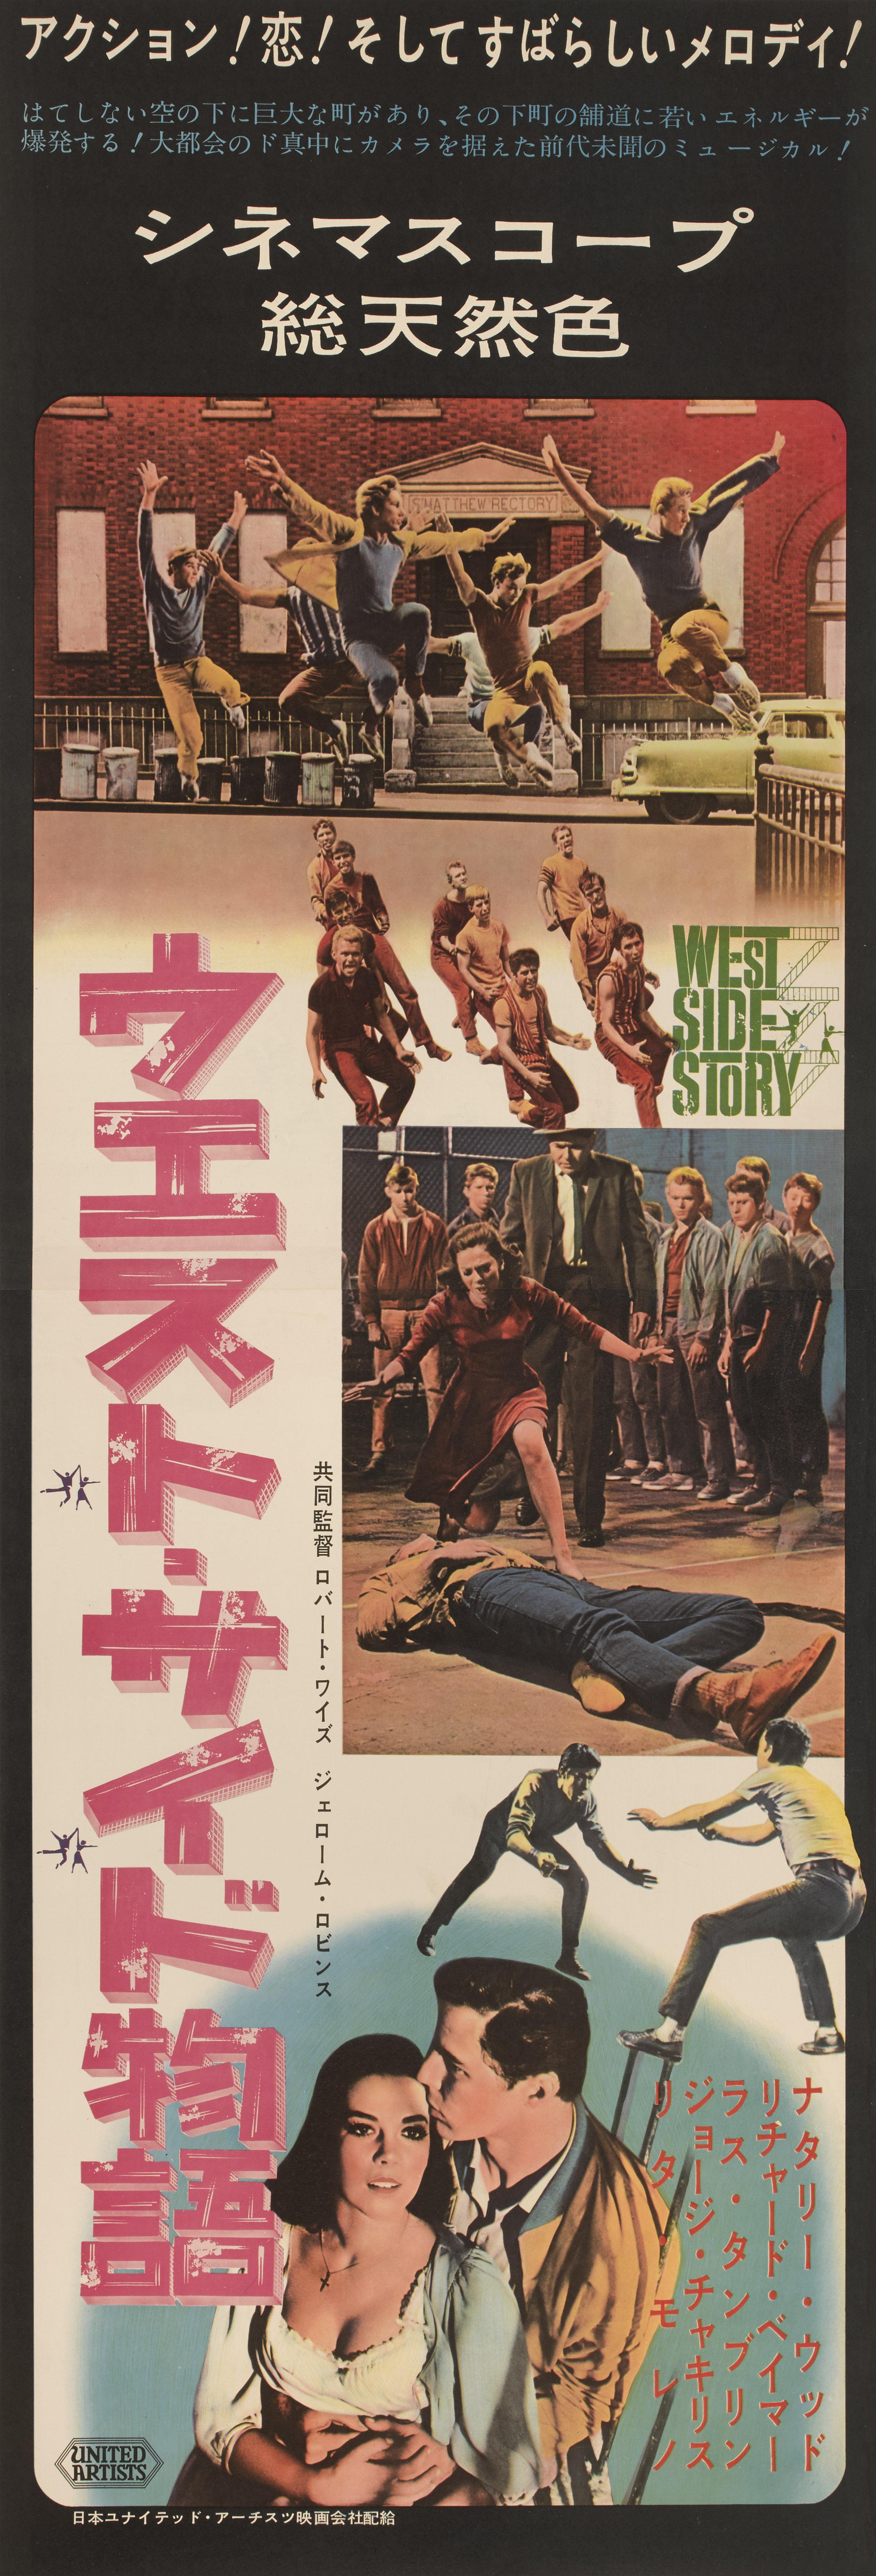 Japanese West Side Story For Sale